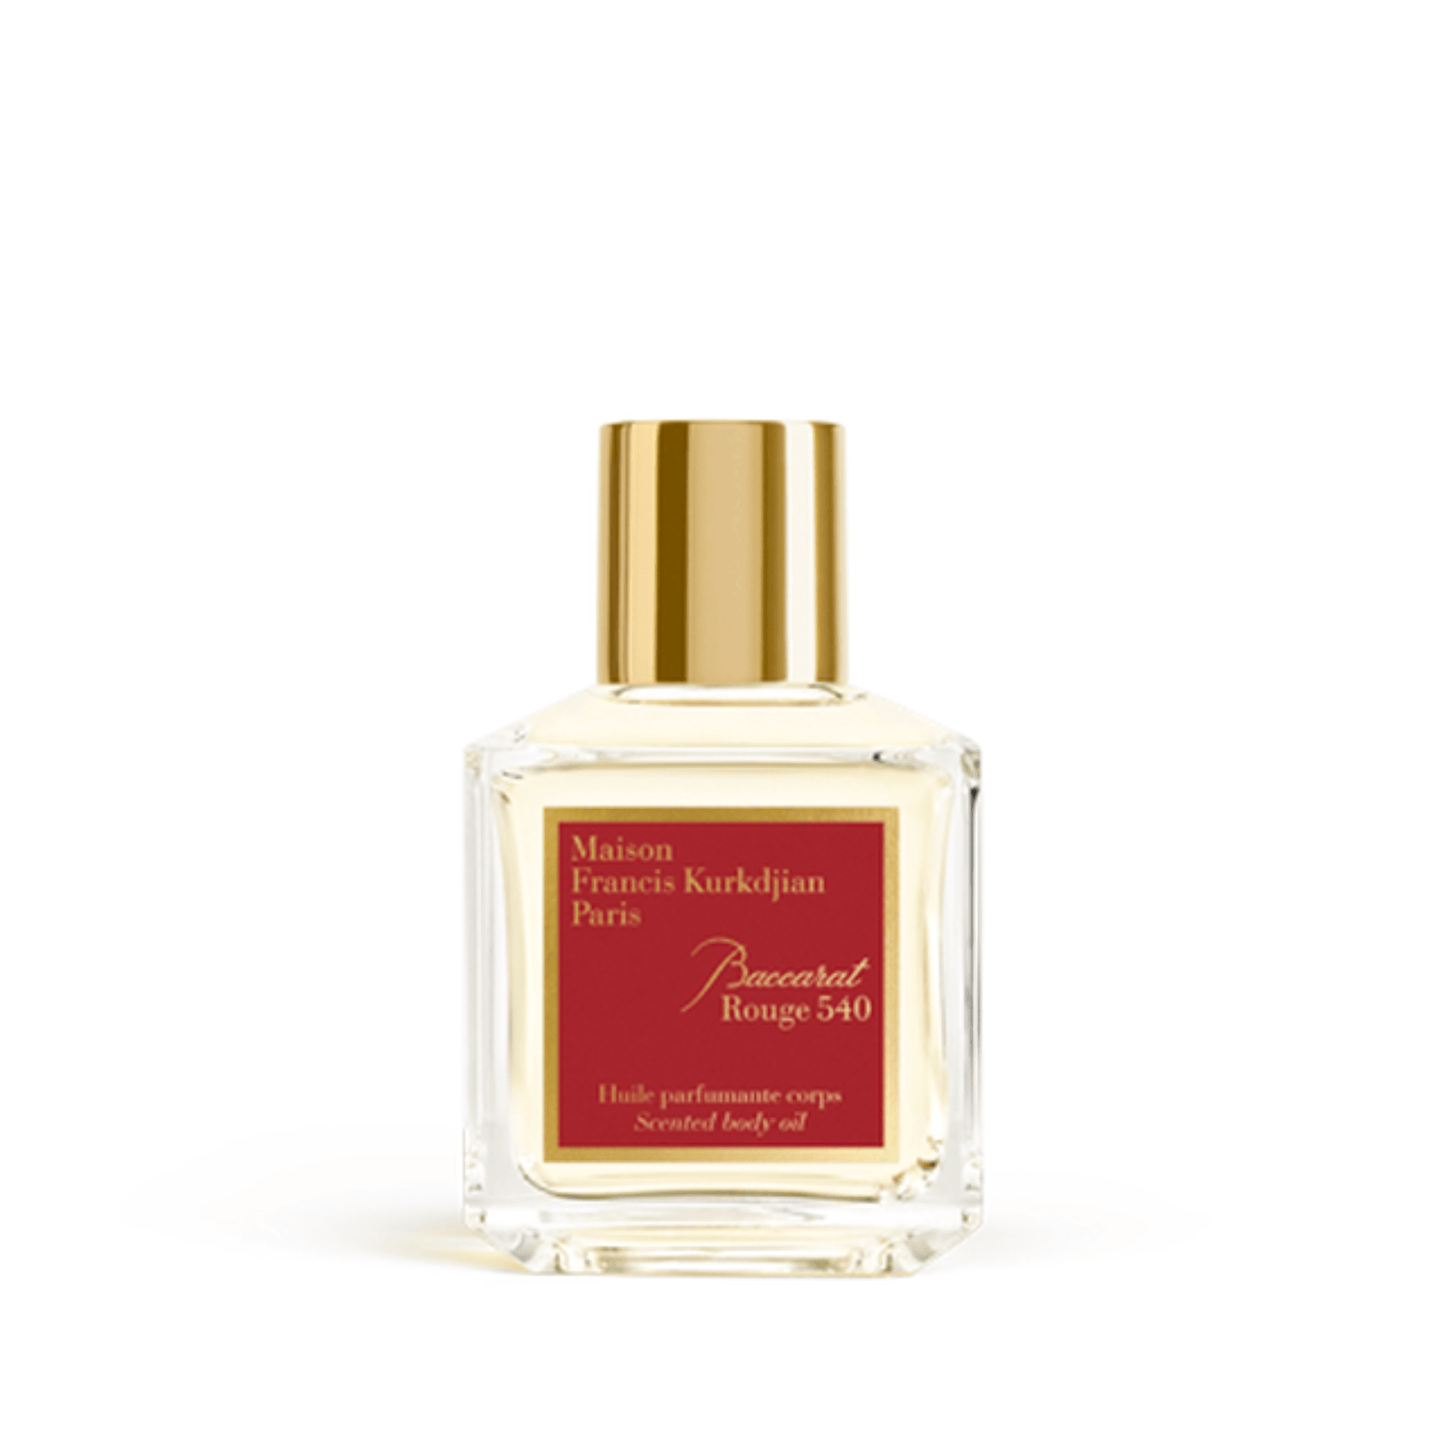 Primary Image of Baccarat Rouge 540 Scented Body Oil